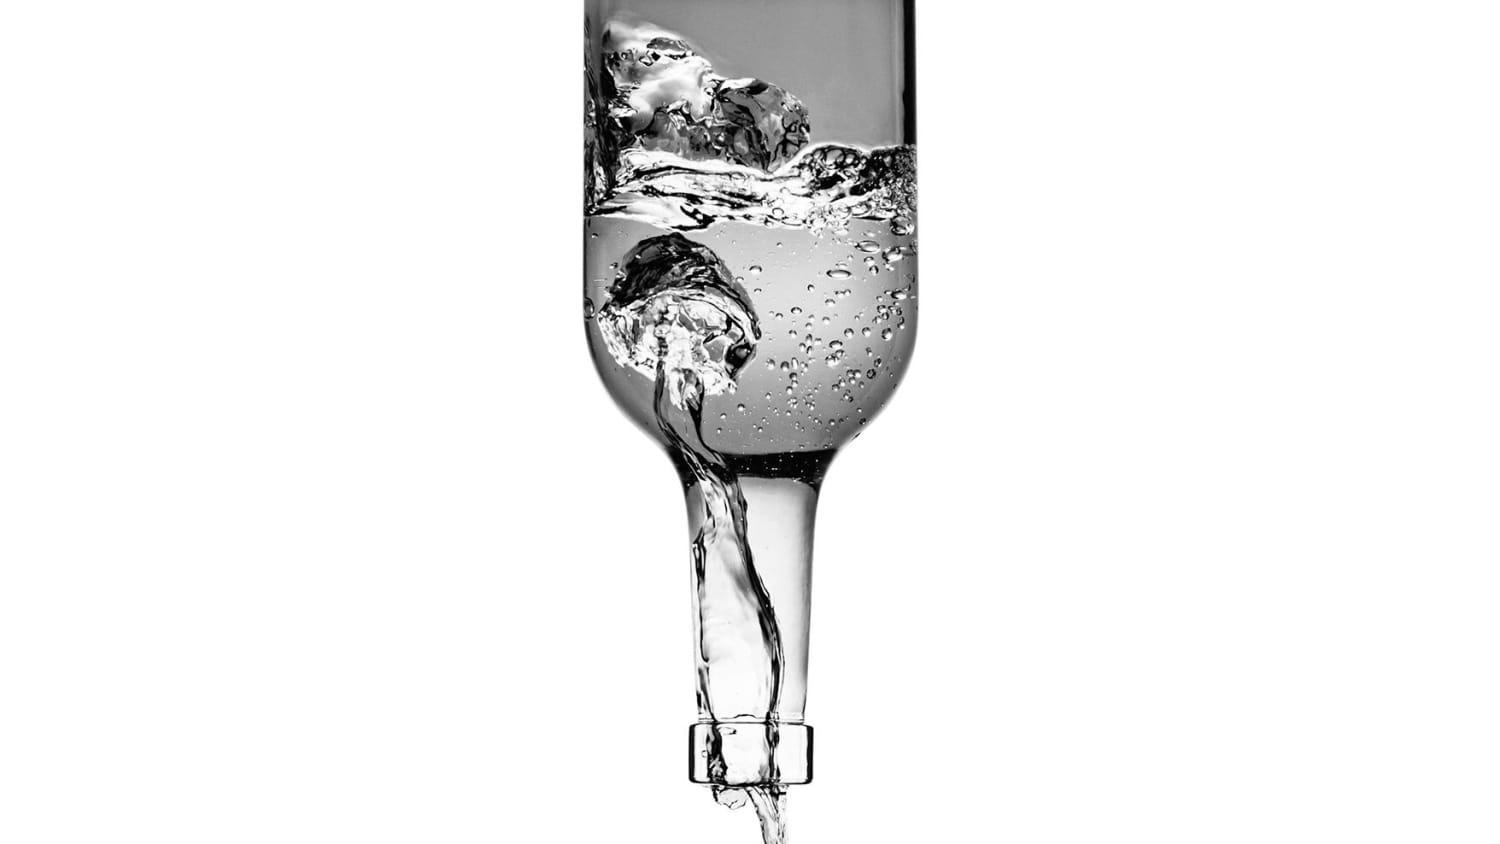 Do you know a good water sommelier?